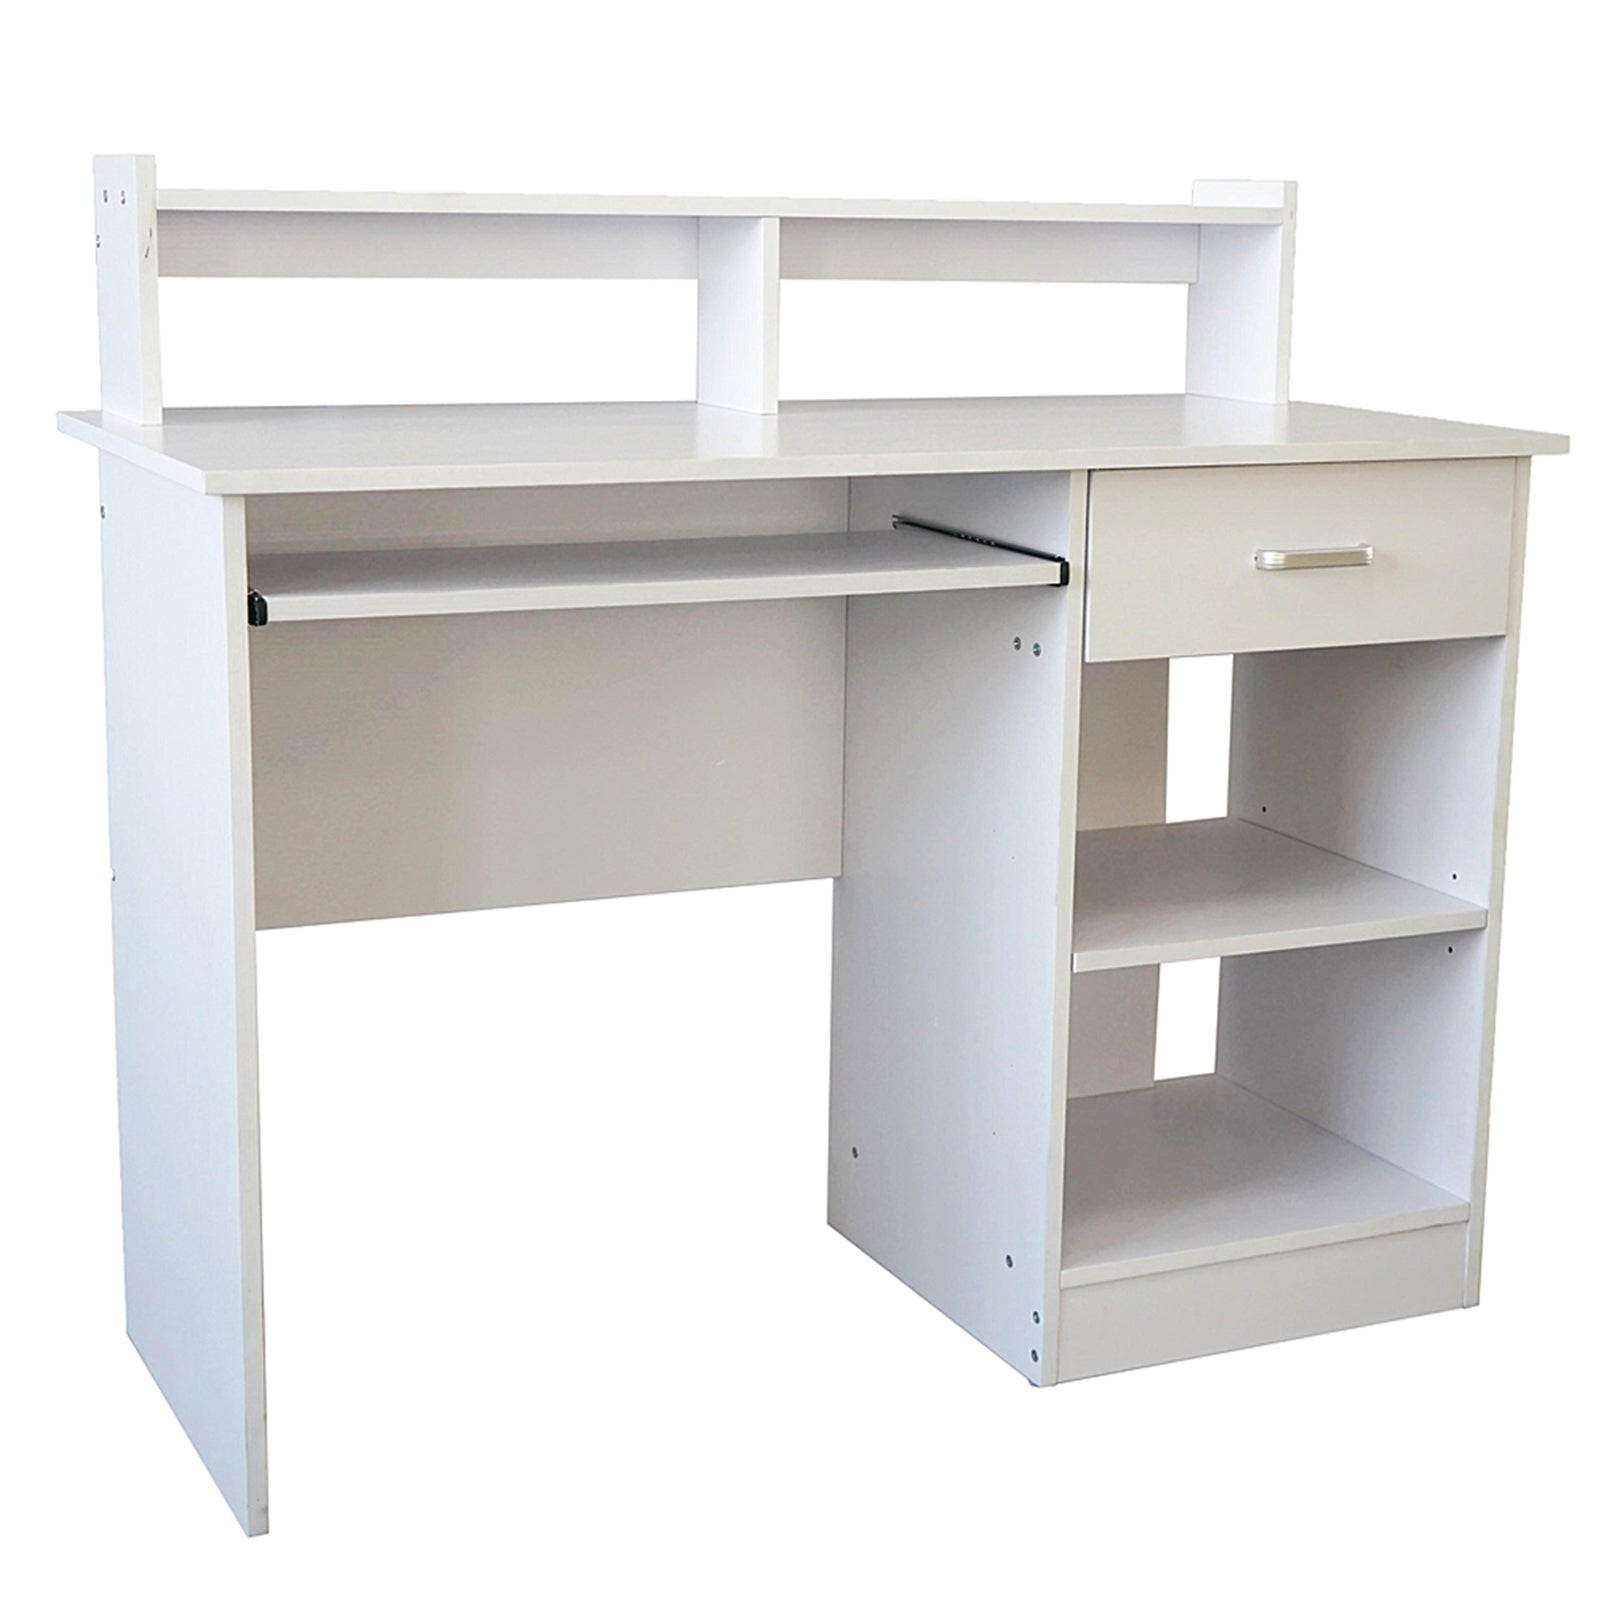 ZNTS General Style Modern E1 15MM Chipboard Computer Desk White 79137938